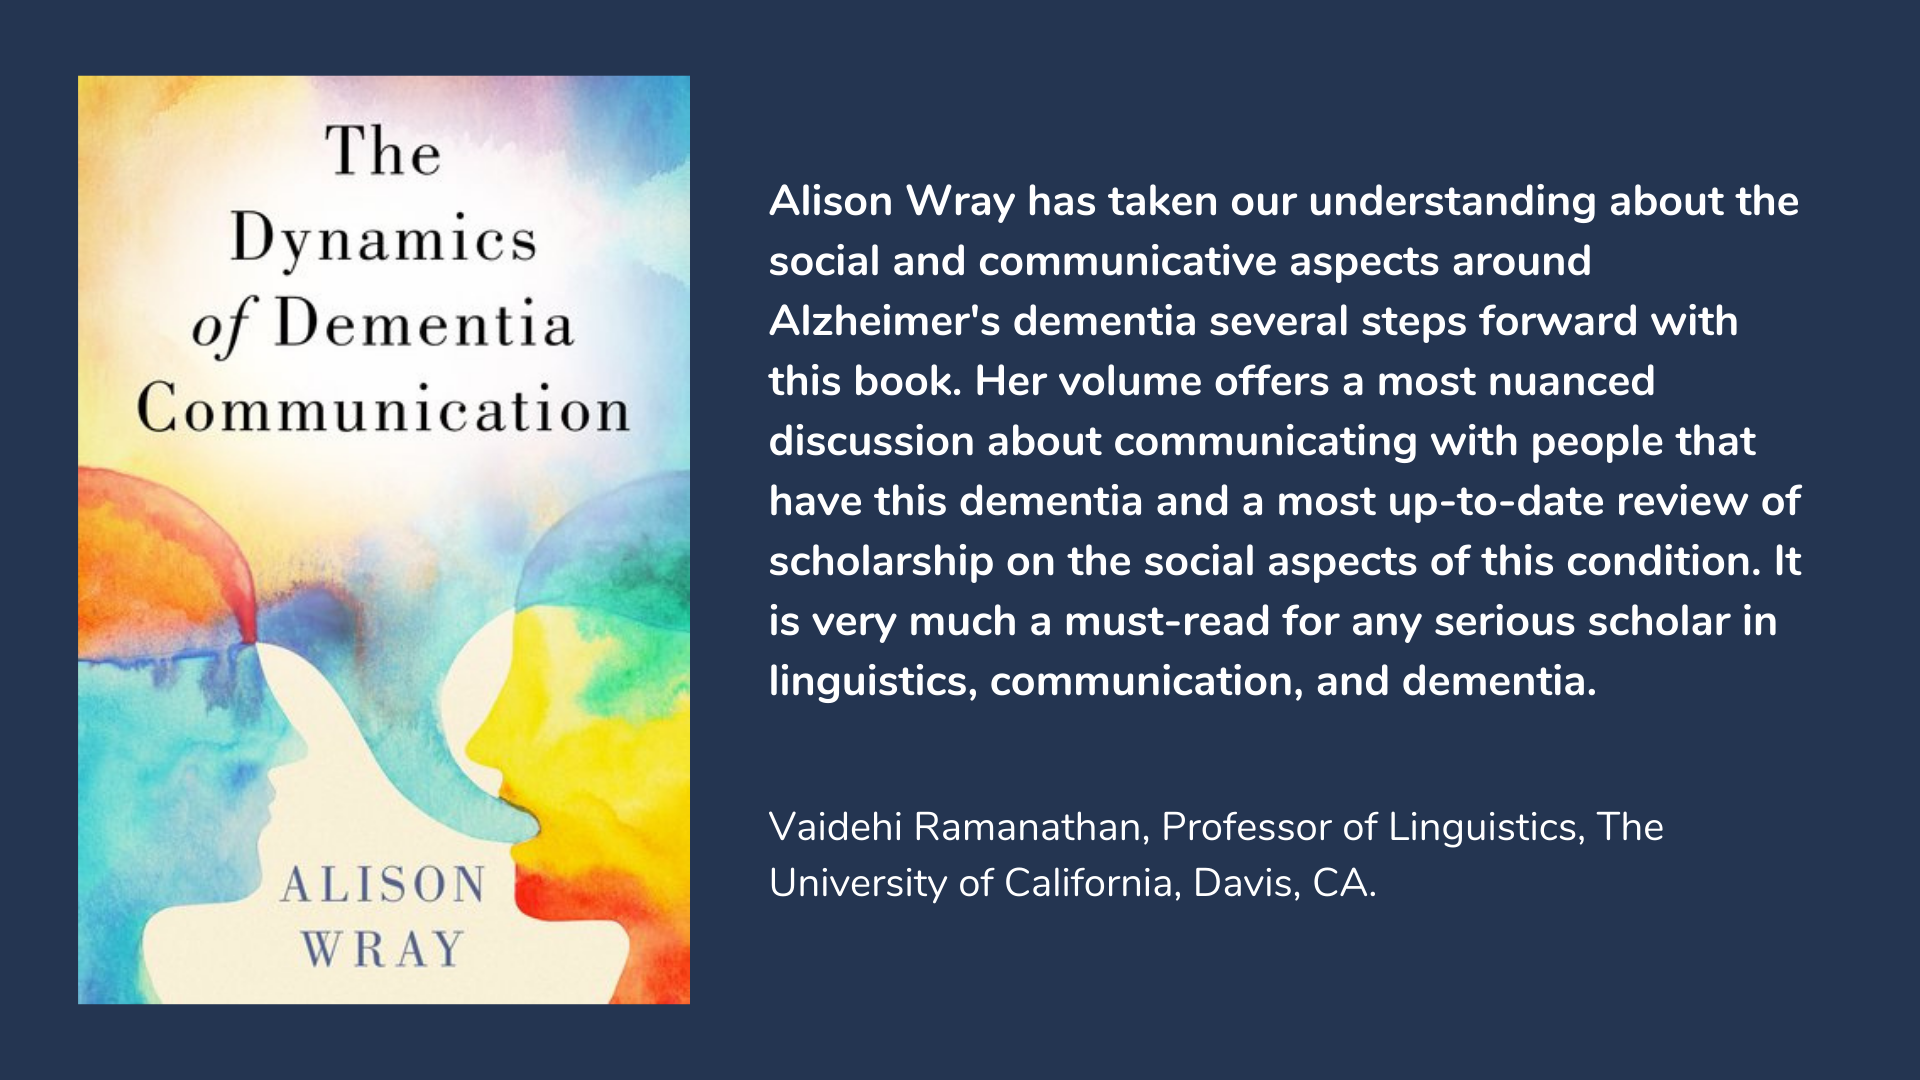 The Dynamics of Dementia Communication, book cover and description.